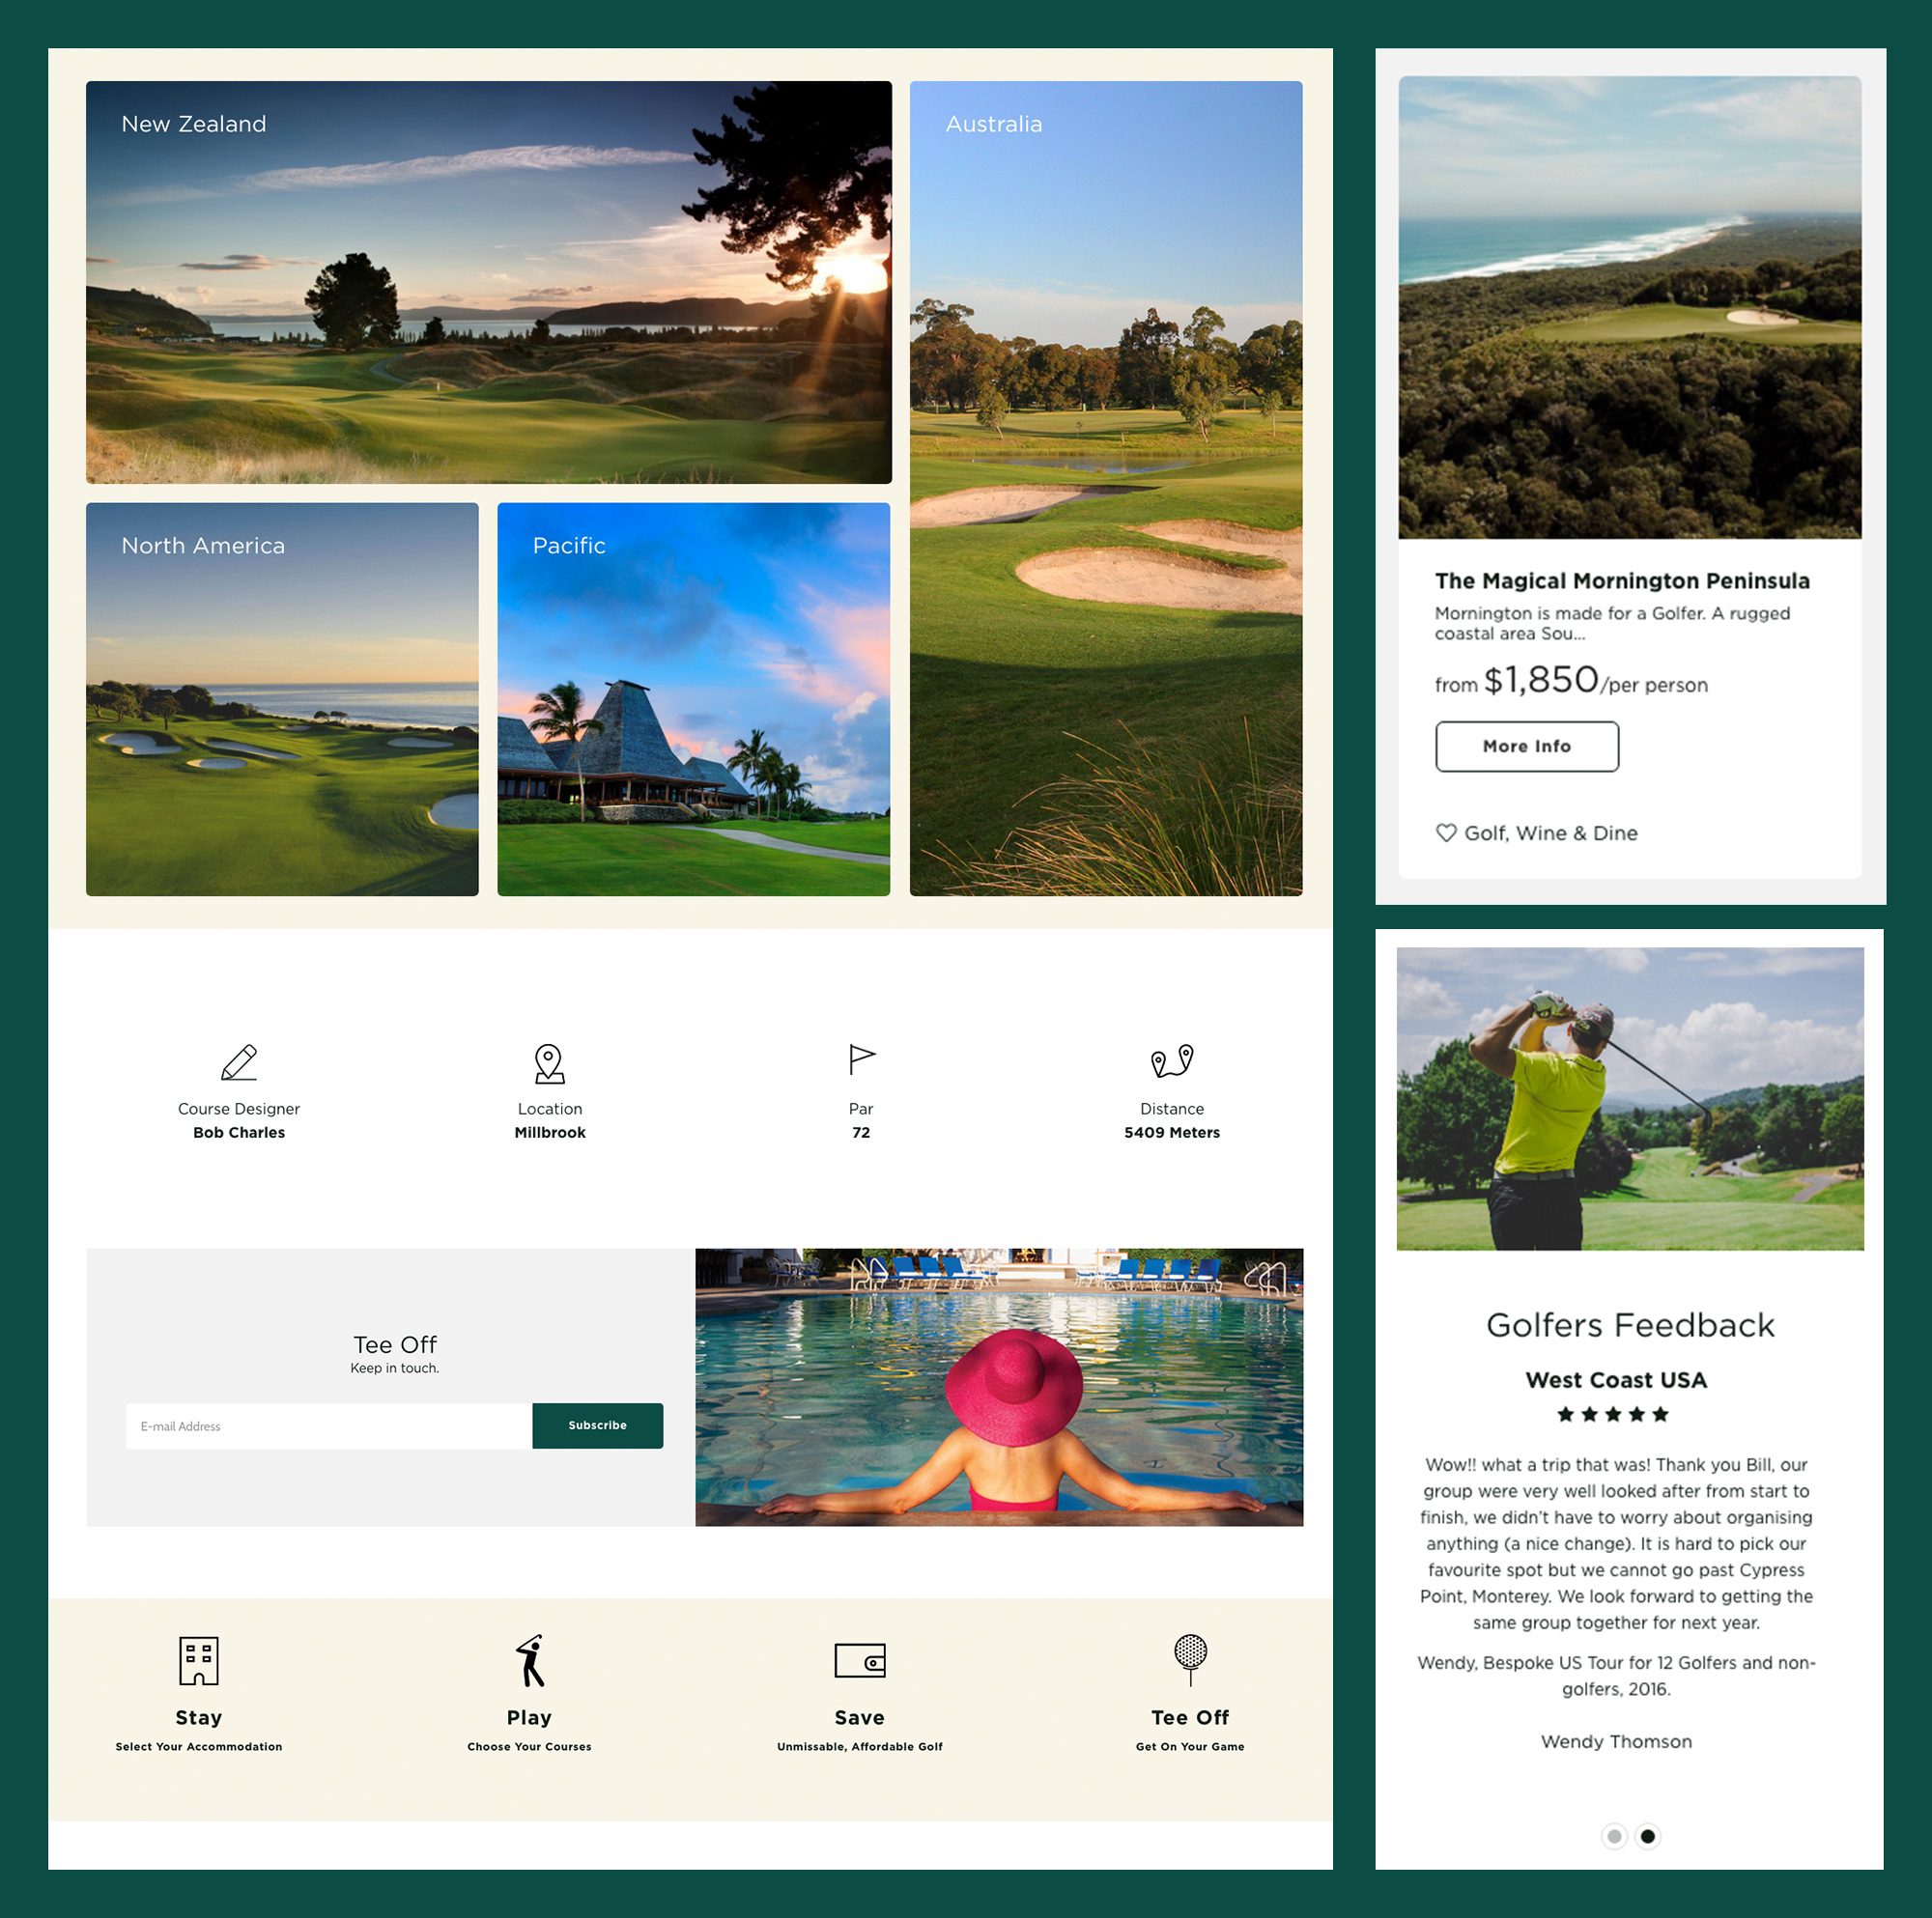 REDFIRE_experiencegolf_photography_branding_packaging_digital_graphicdesign_advertising_brochure_designagency